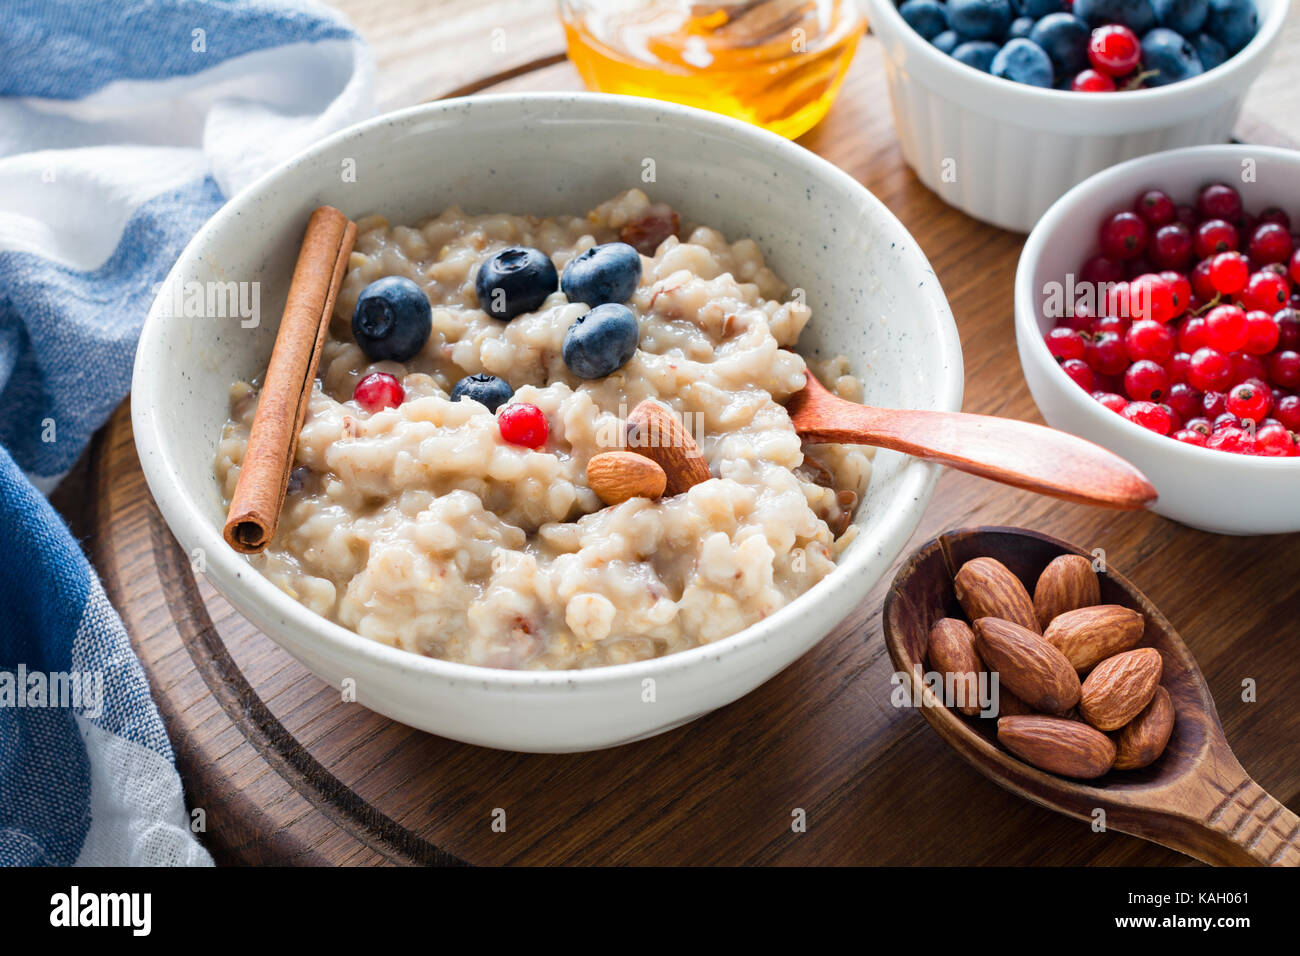 Oatmeal porridge with blueberries, almonds and currants in bowl. Healthy breakfast, dieting, balanced meal concept Stock Photo